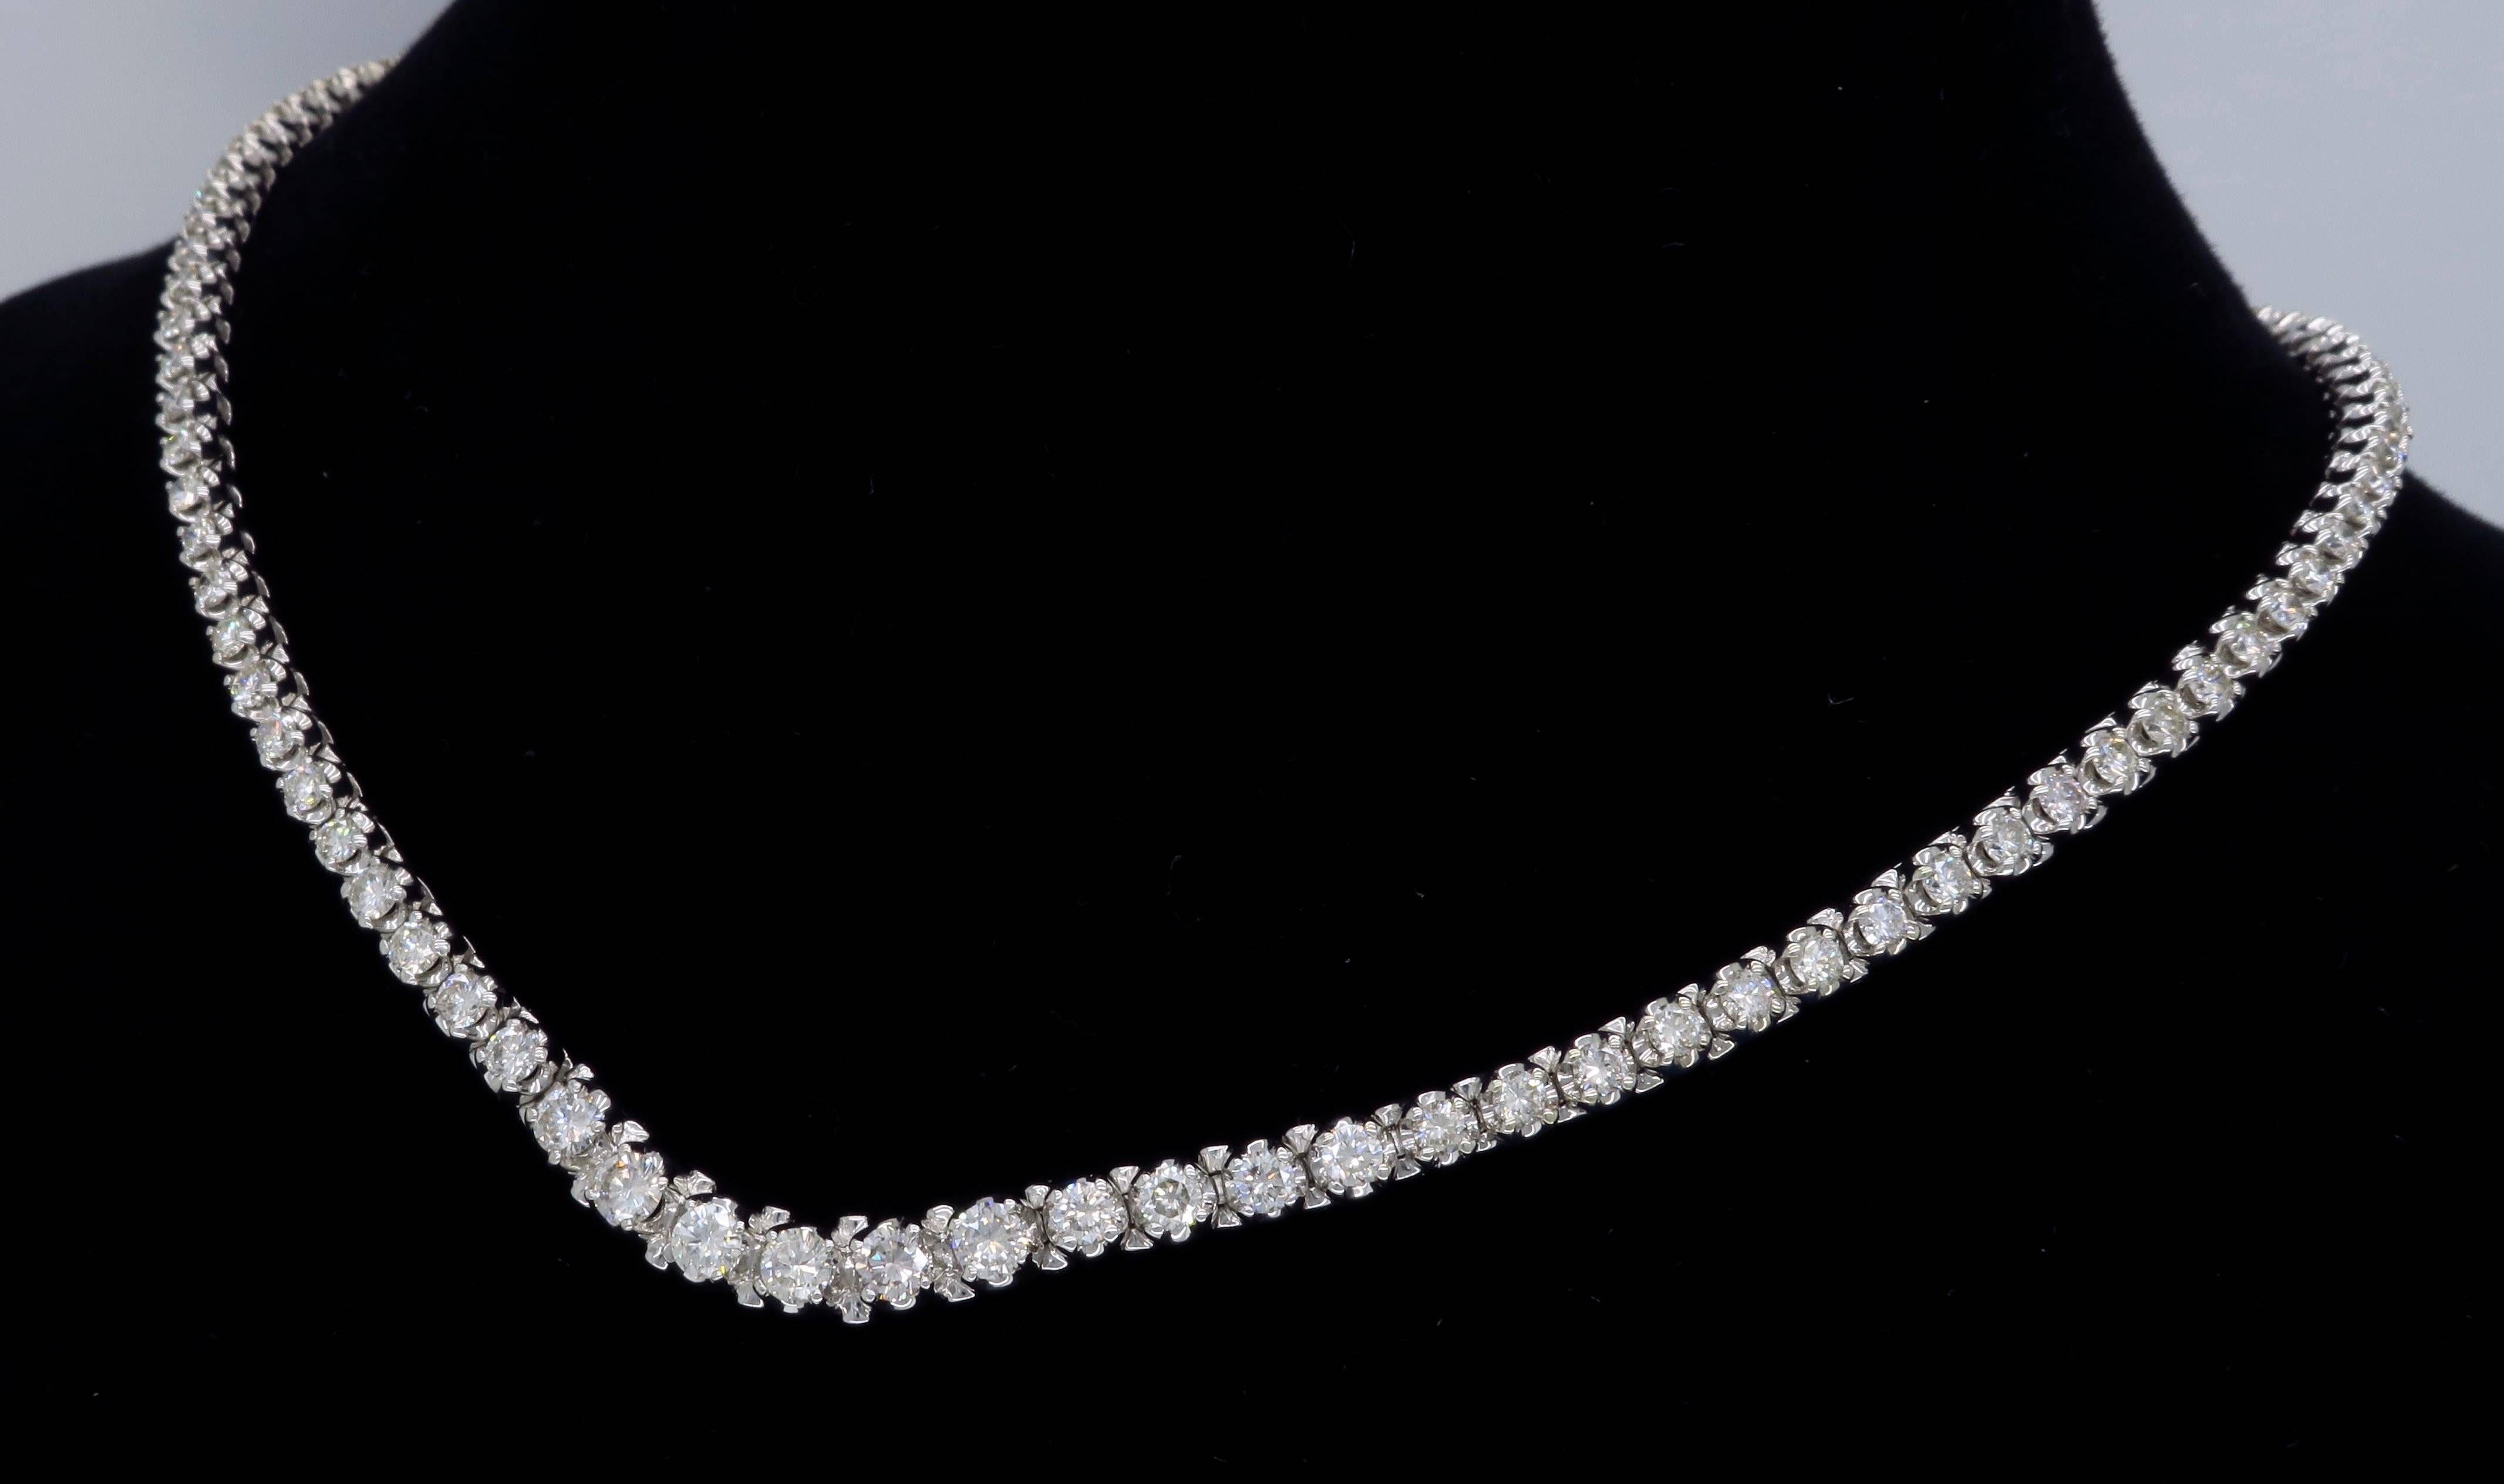 Stunning necklace features 108 Round Brilliant Cut Diamonds with an average color of G-I and an average clarity of VS1-SI2. There is approximately 5.75CTW of diamonds in this beautiful necklace. The 14K White gold necklace weighs 31.1 grams and is